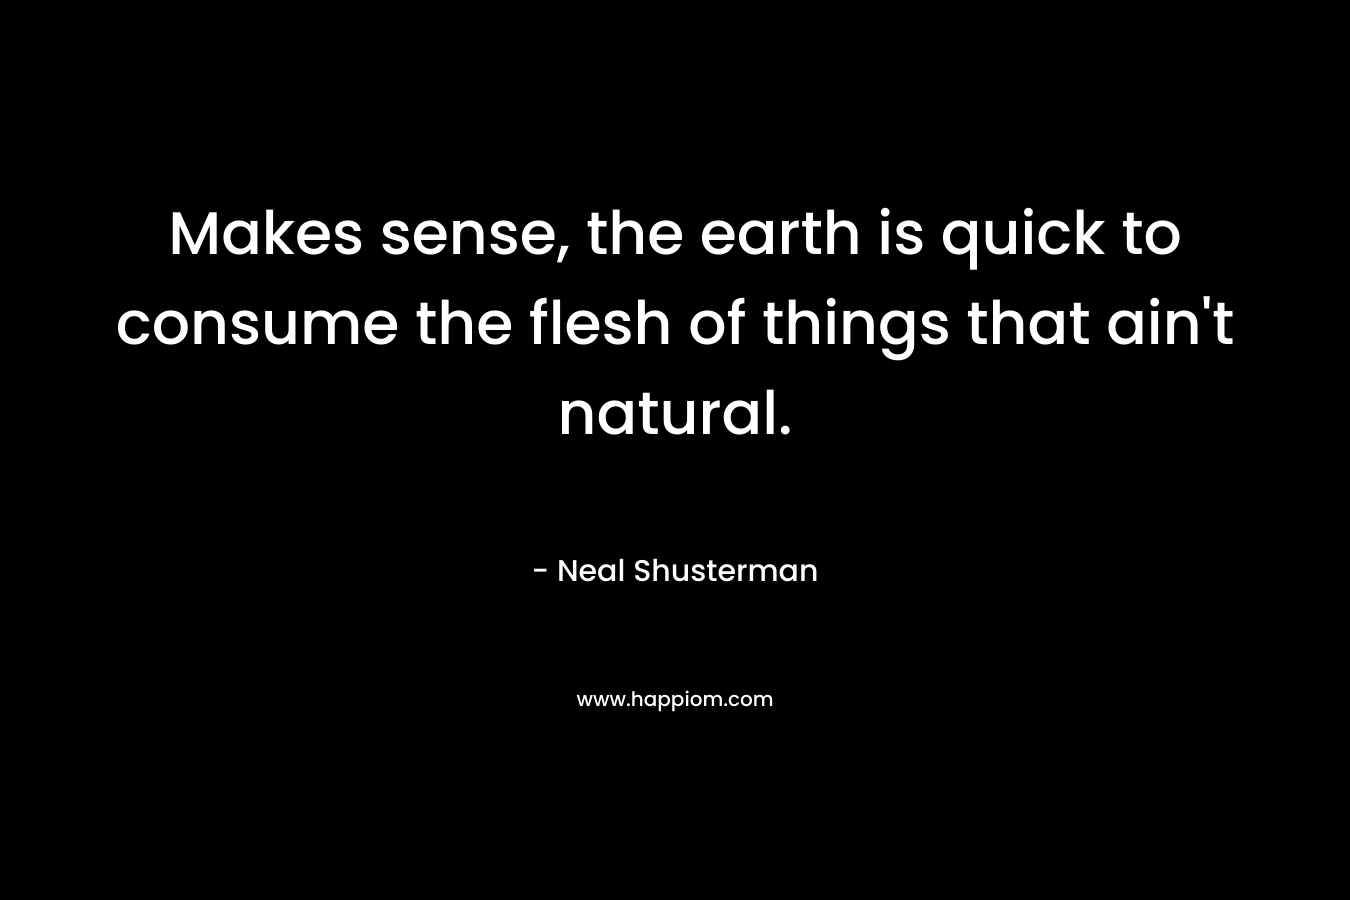 Makes sense, the earth is quick to consume the flesh of things that ain’t natural. – Neal Shusterman